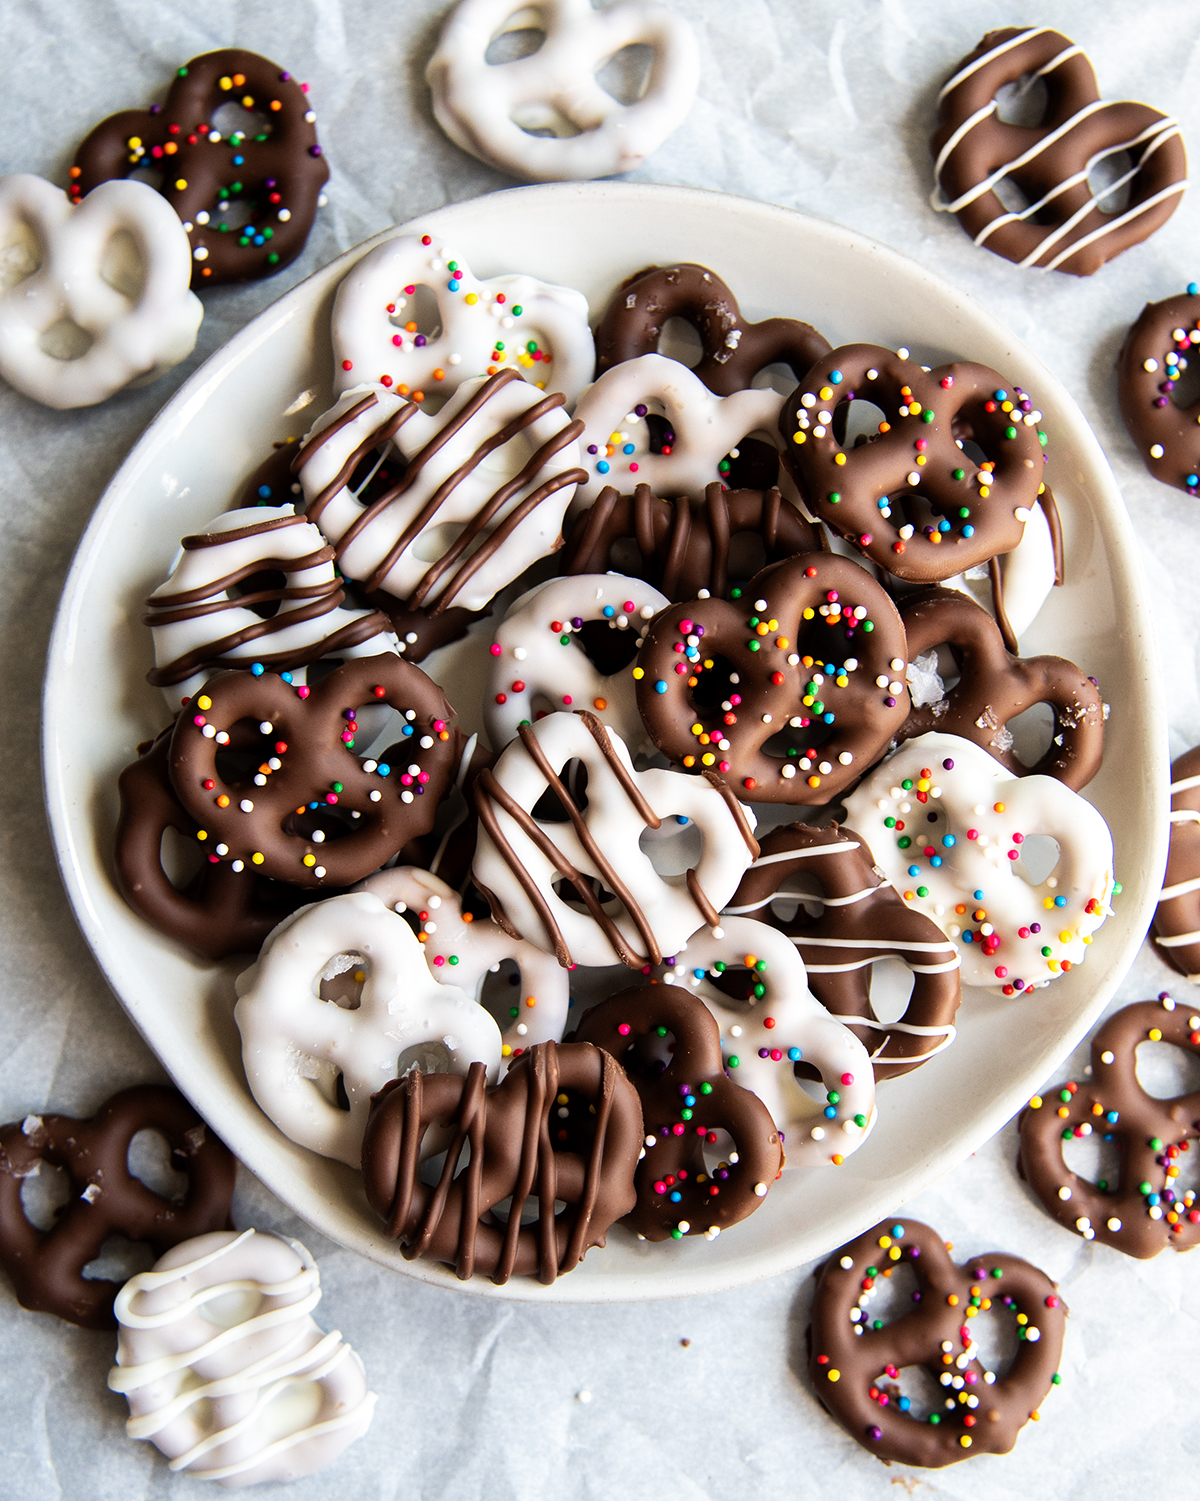 An above photo of chocolate covered pretzels on a plate, some are white chocolate and some are milk chocolate.